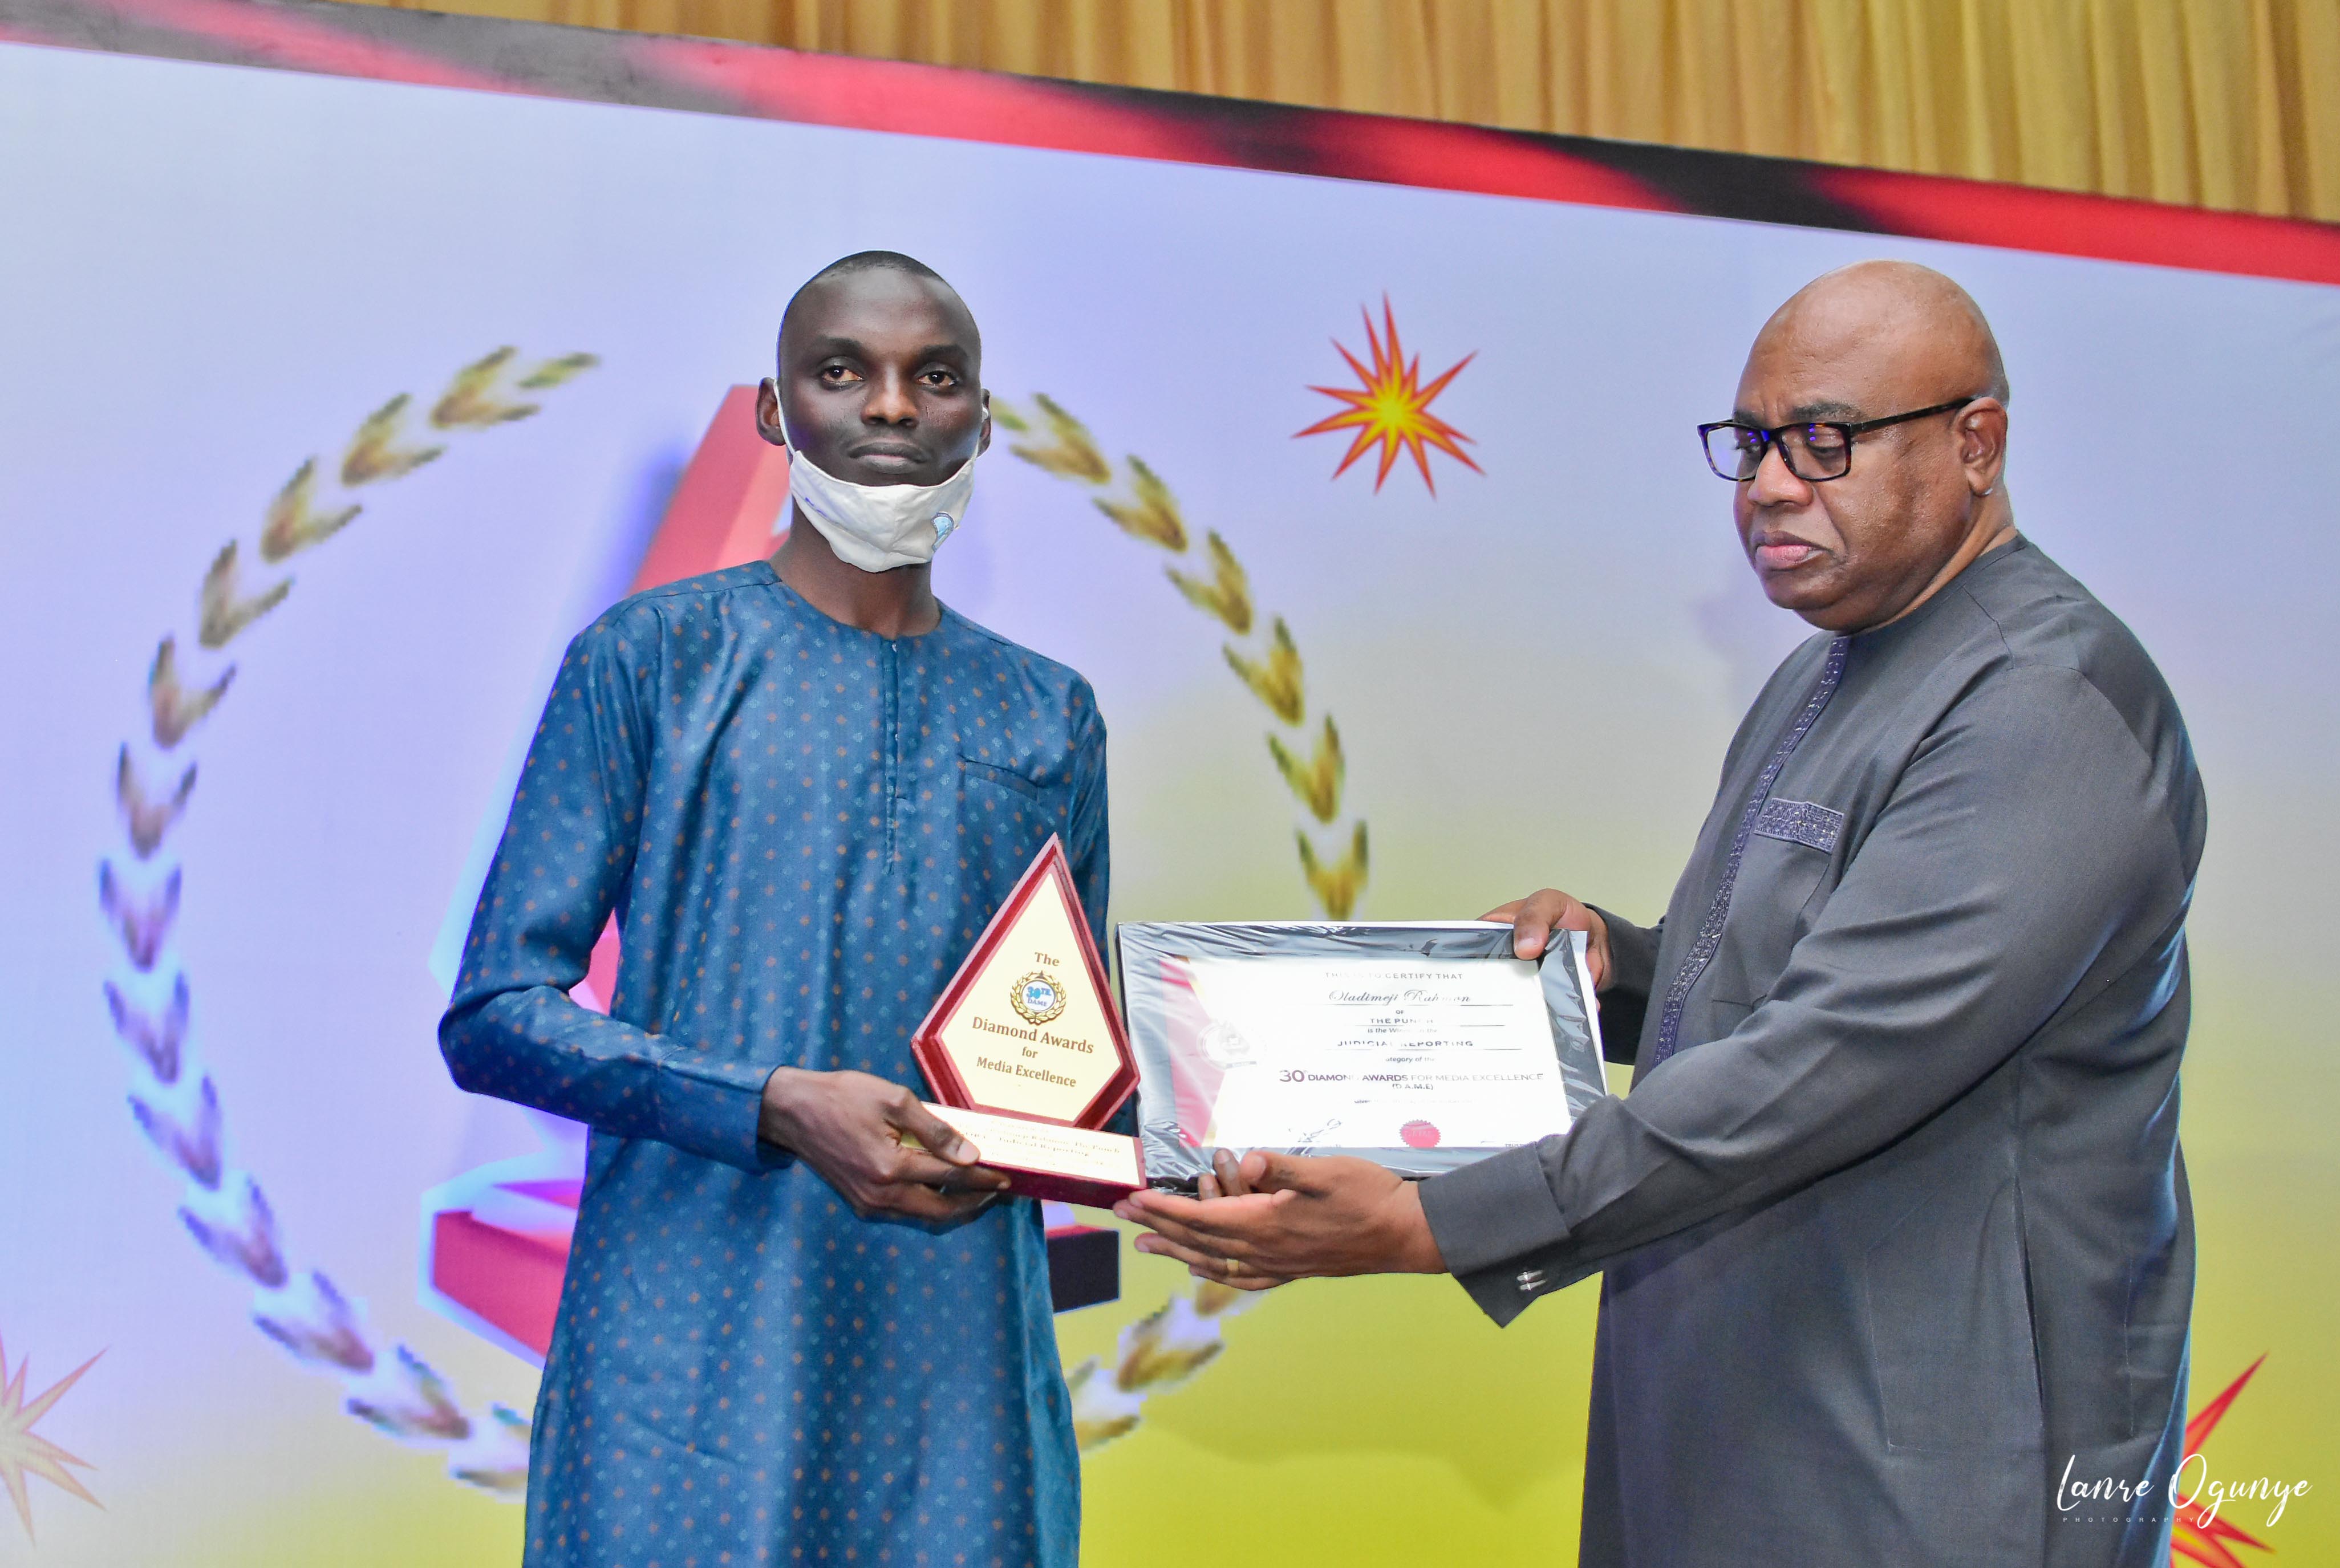 <span  class="uc_style_uc_tiles_grid_image_elementor_uc_items_attribute_title" style="color:#ffffff;">Judicial Reporting Hanafi standing in for Oladimeji Ramon receives prize from Jide Onalaja</span>